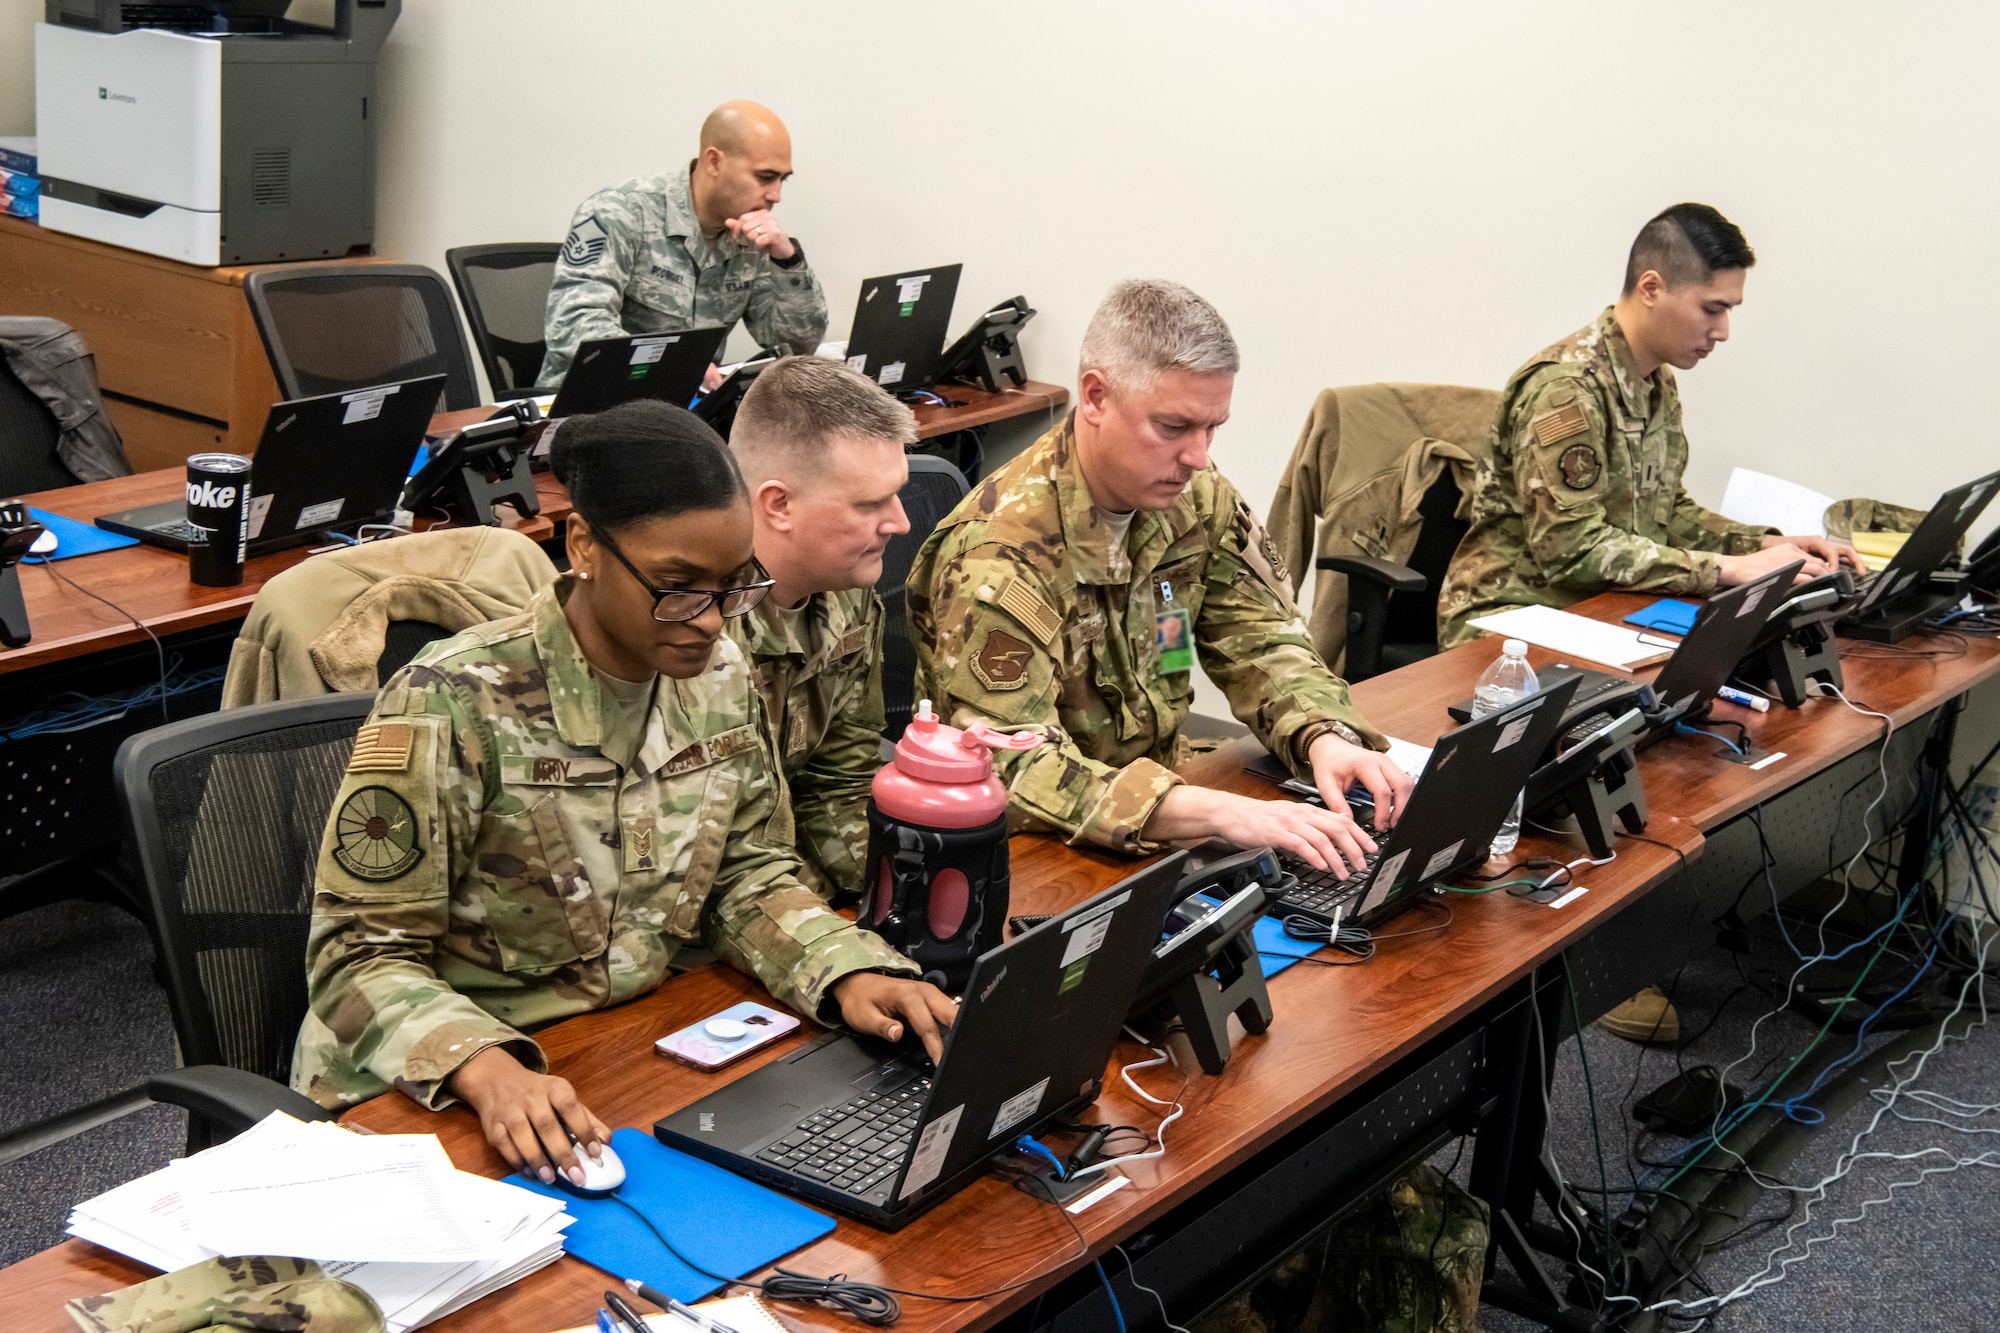 Members of the 436th Airlift Wing Crisis Battle Staff work on Dover Air Force Base’s response to COVID-19 March 16, 2020, at Dover AFB, Delaware. The team is committed to protecting the health of our communities and will continue to monitor and assess the situation. (U.S. Air Force photo by Senior Airman Christopher Quail) (This photo has been altered for security purposes by blurring out identification badges)